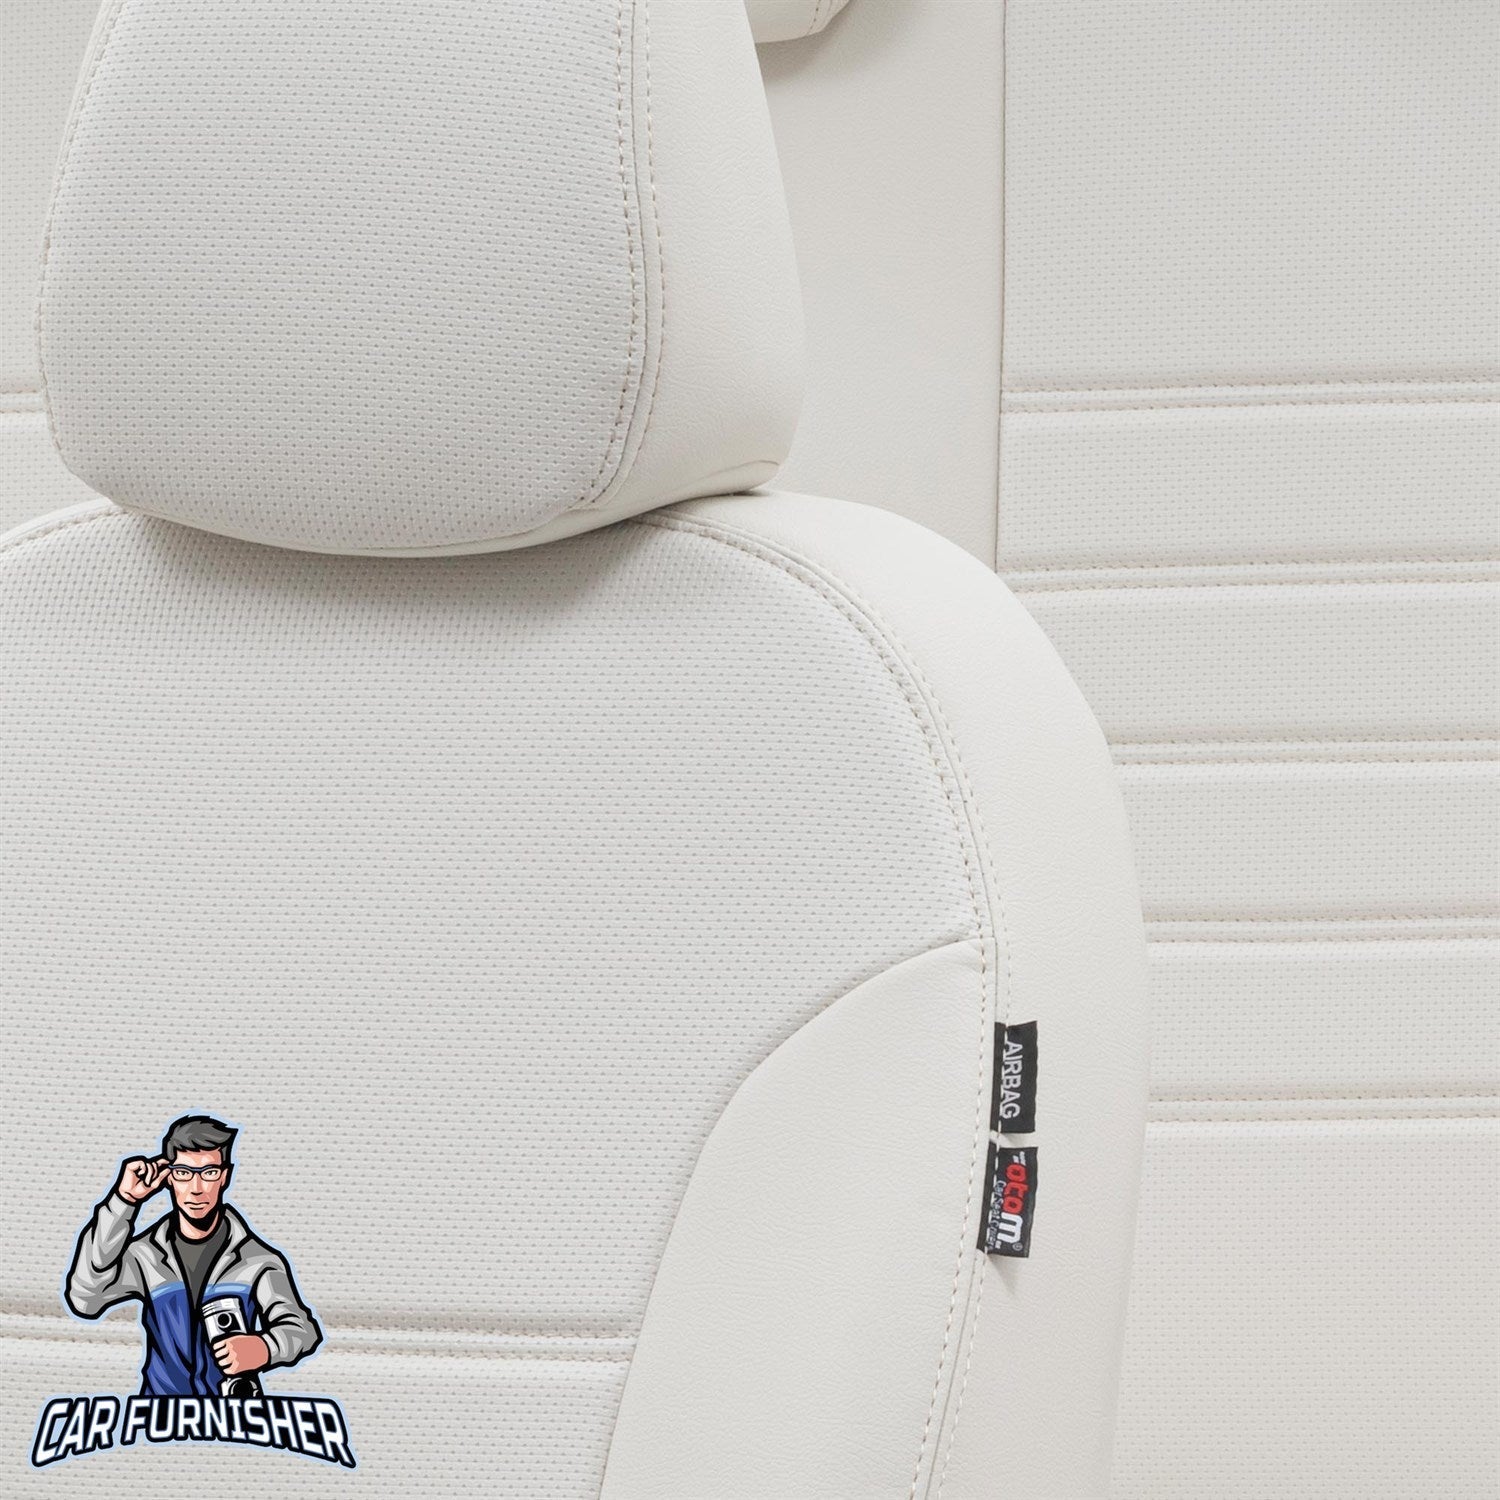 Ford Kuga Seat Covers New York Leather Design Ivory Leather